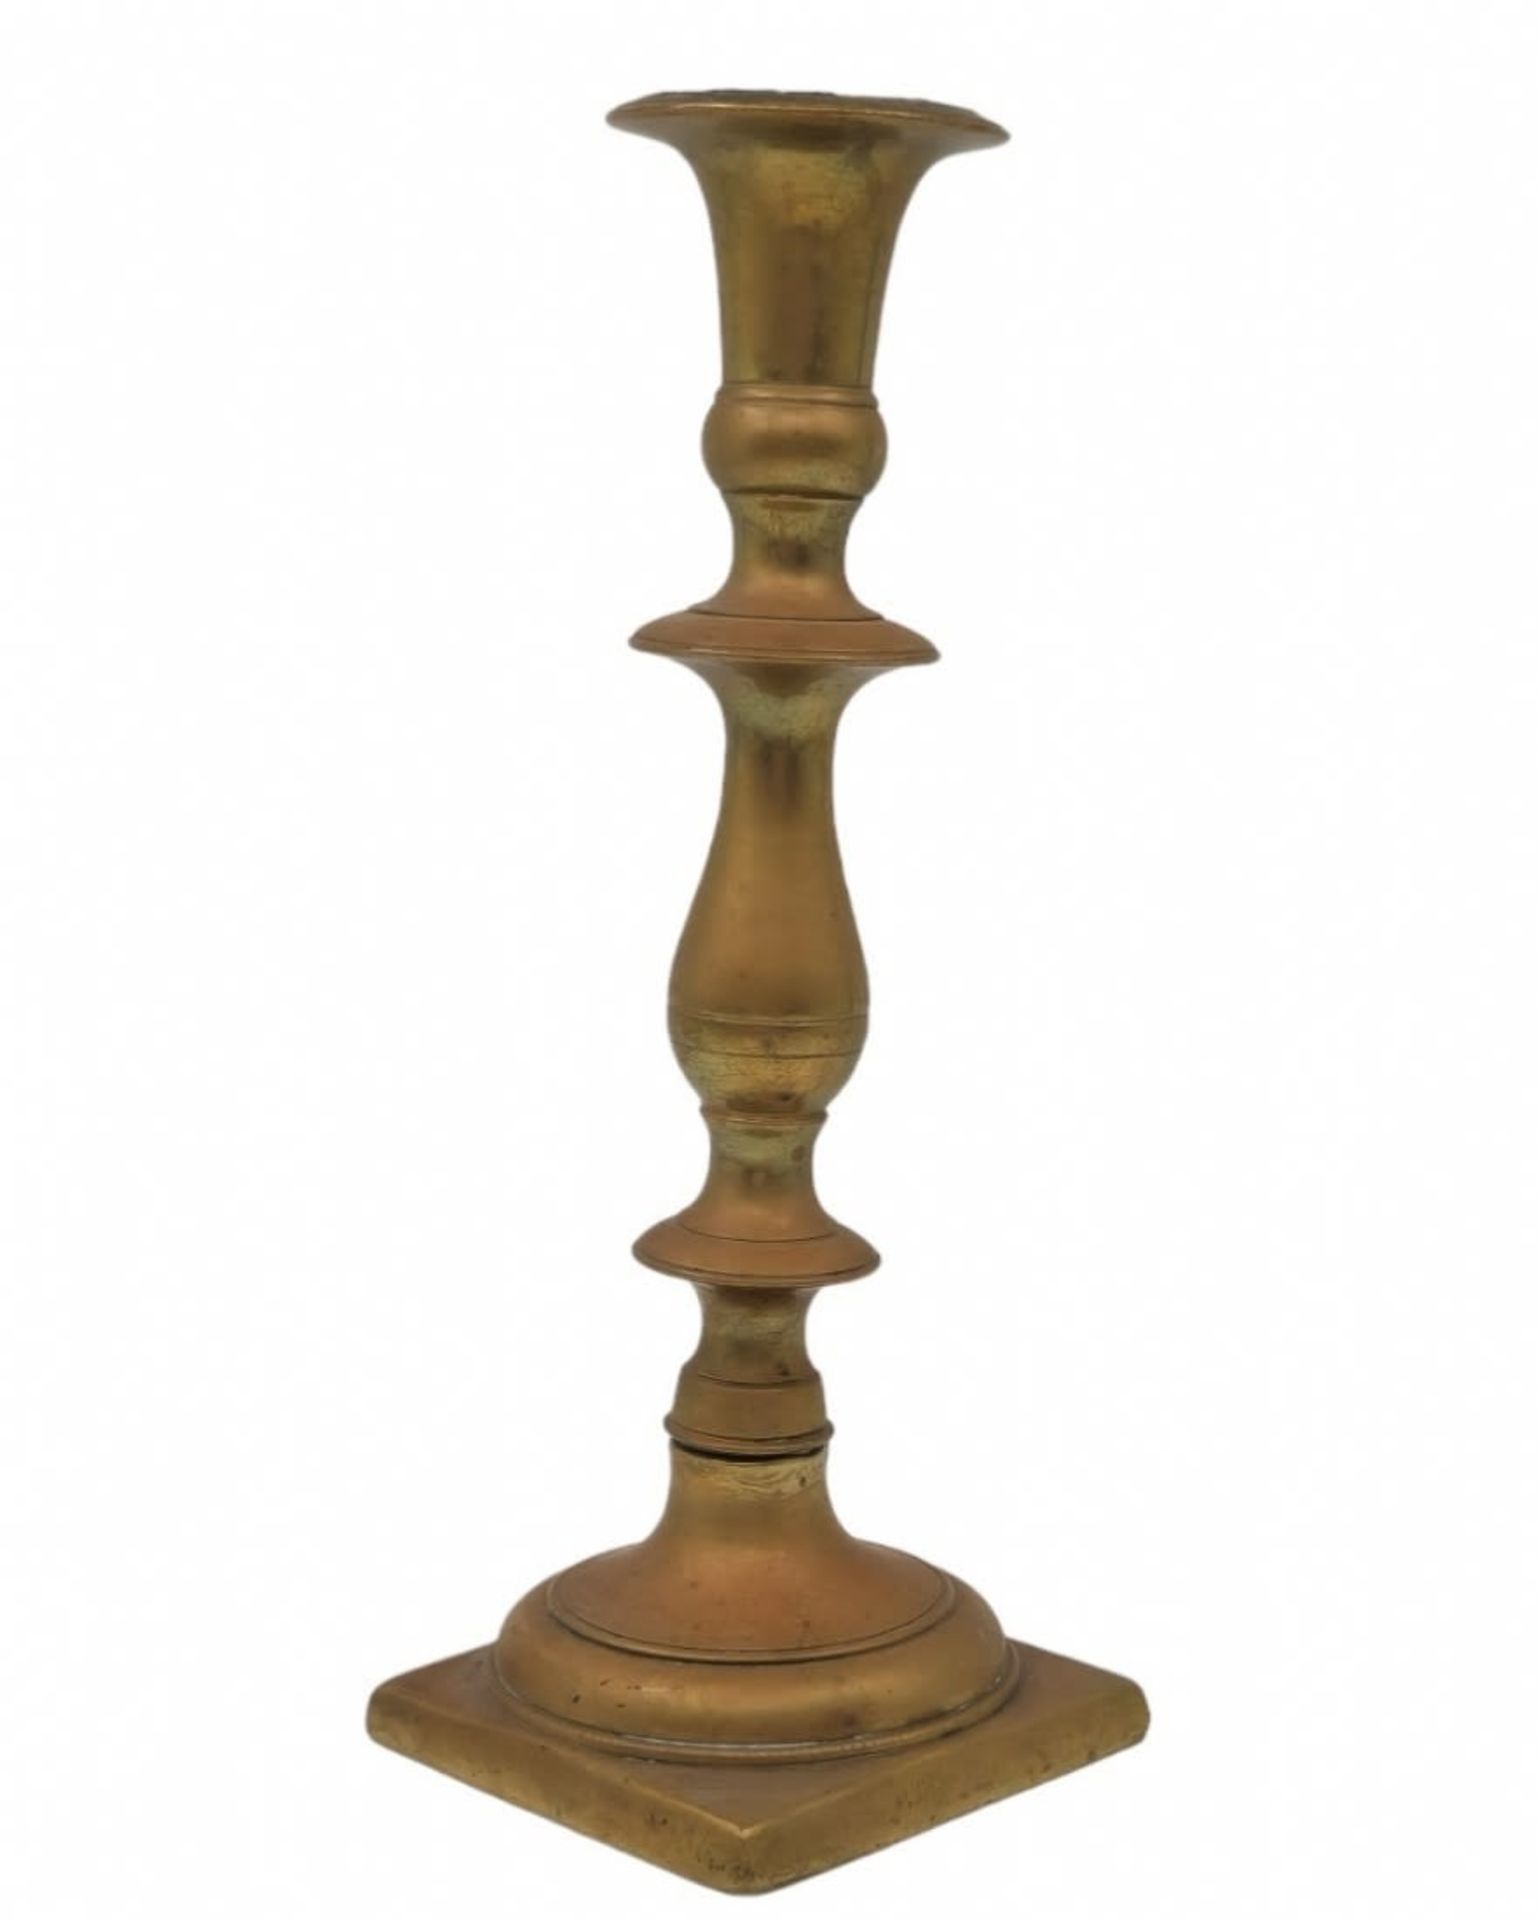 An antique Jewish candlestick from the 18th century, made of bronze (two parts), converted in the - Bild 2 aus 2